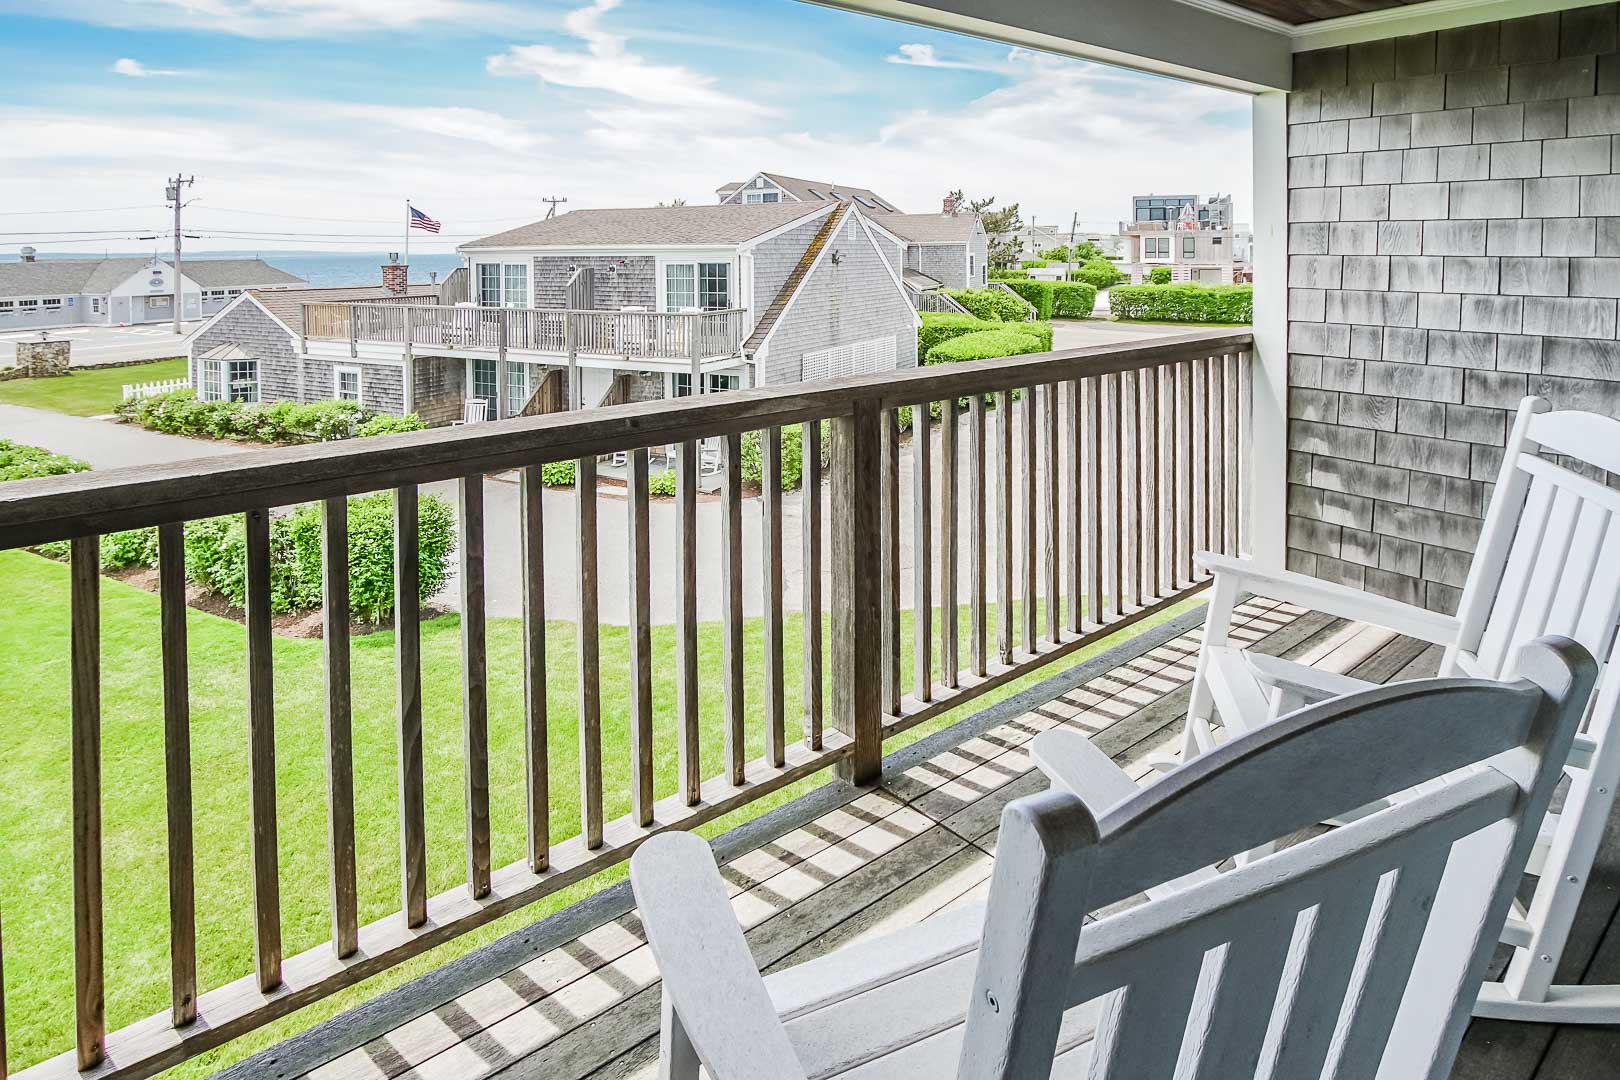 A pleasant view from the balcony at VRI's Beachside Village Resort in Massachusetts.